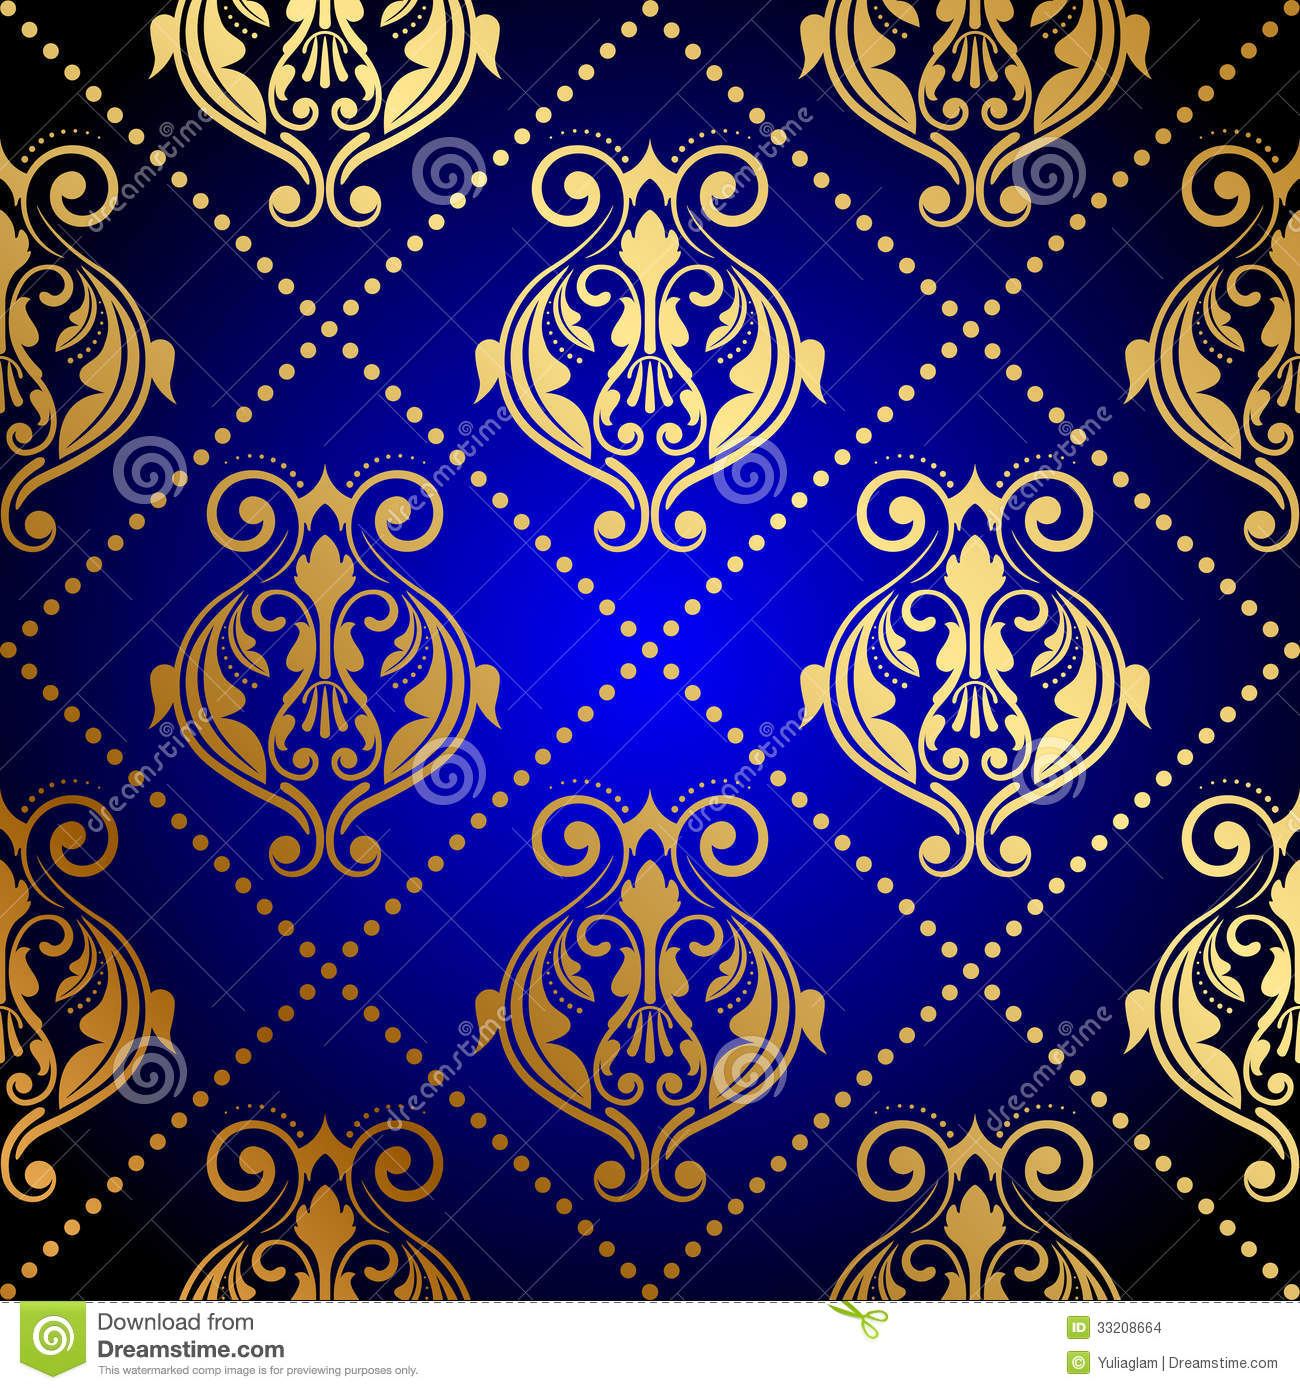 gold and blue wallpaper #6